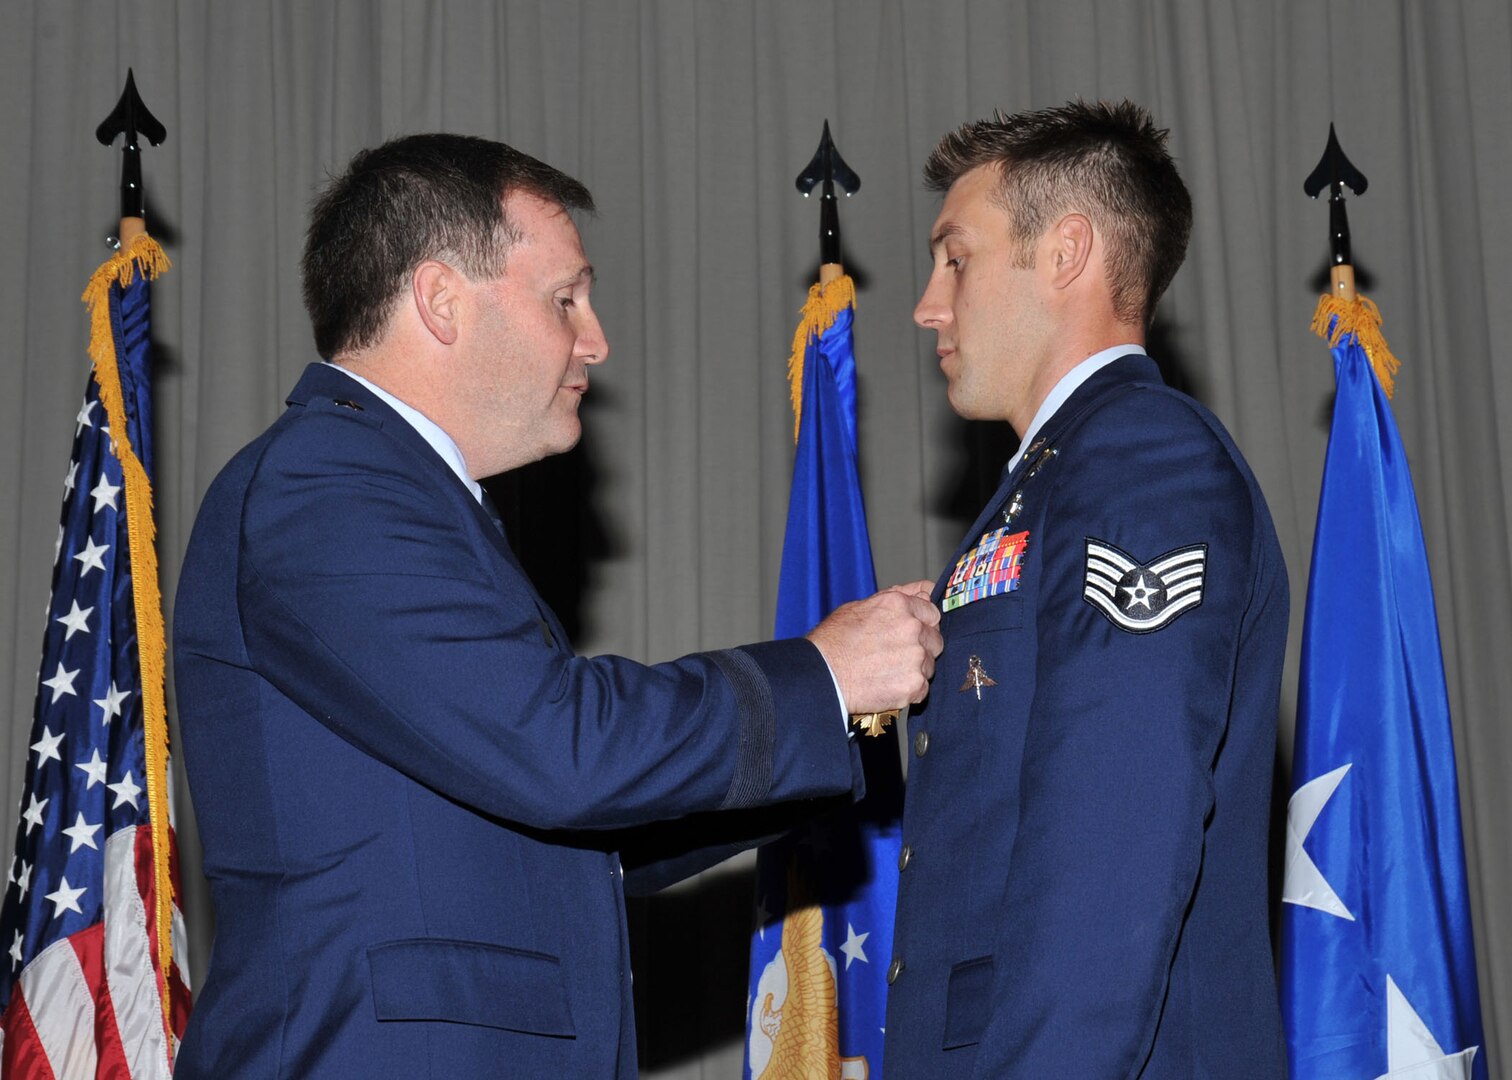 Lt. Gen. Douglas H. Owens, Air Education and Training Command vice commander, presents Staff Sgt. John W. Hatzidakis with the Distinguished Flying Cross with valor during an awards presentation at Forbes Hall April 18. Sergeant Hatzidakis, a pararescue Airman with the 342nd Training Squadron, received the award for his heroic actions during a casualty evaluation of a critically wounded British soldier near Lashkar Gah, Afghanistan. (U.S. Air Force photo/Alan Boedeker)